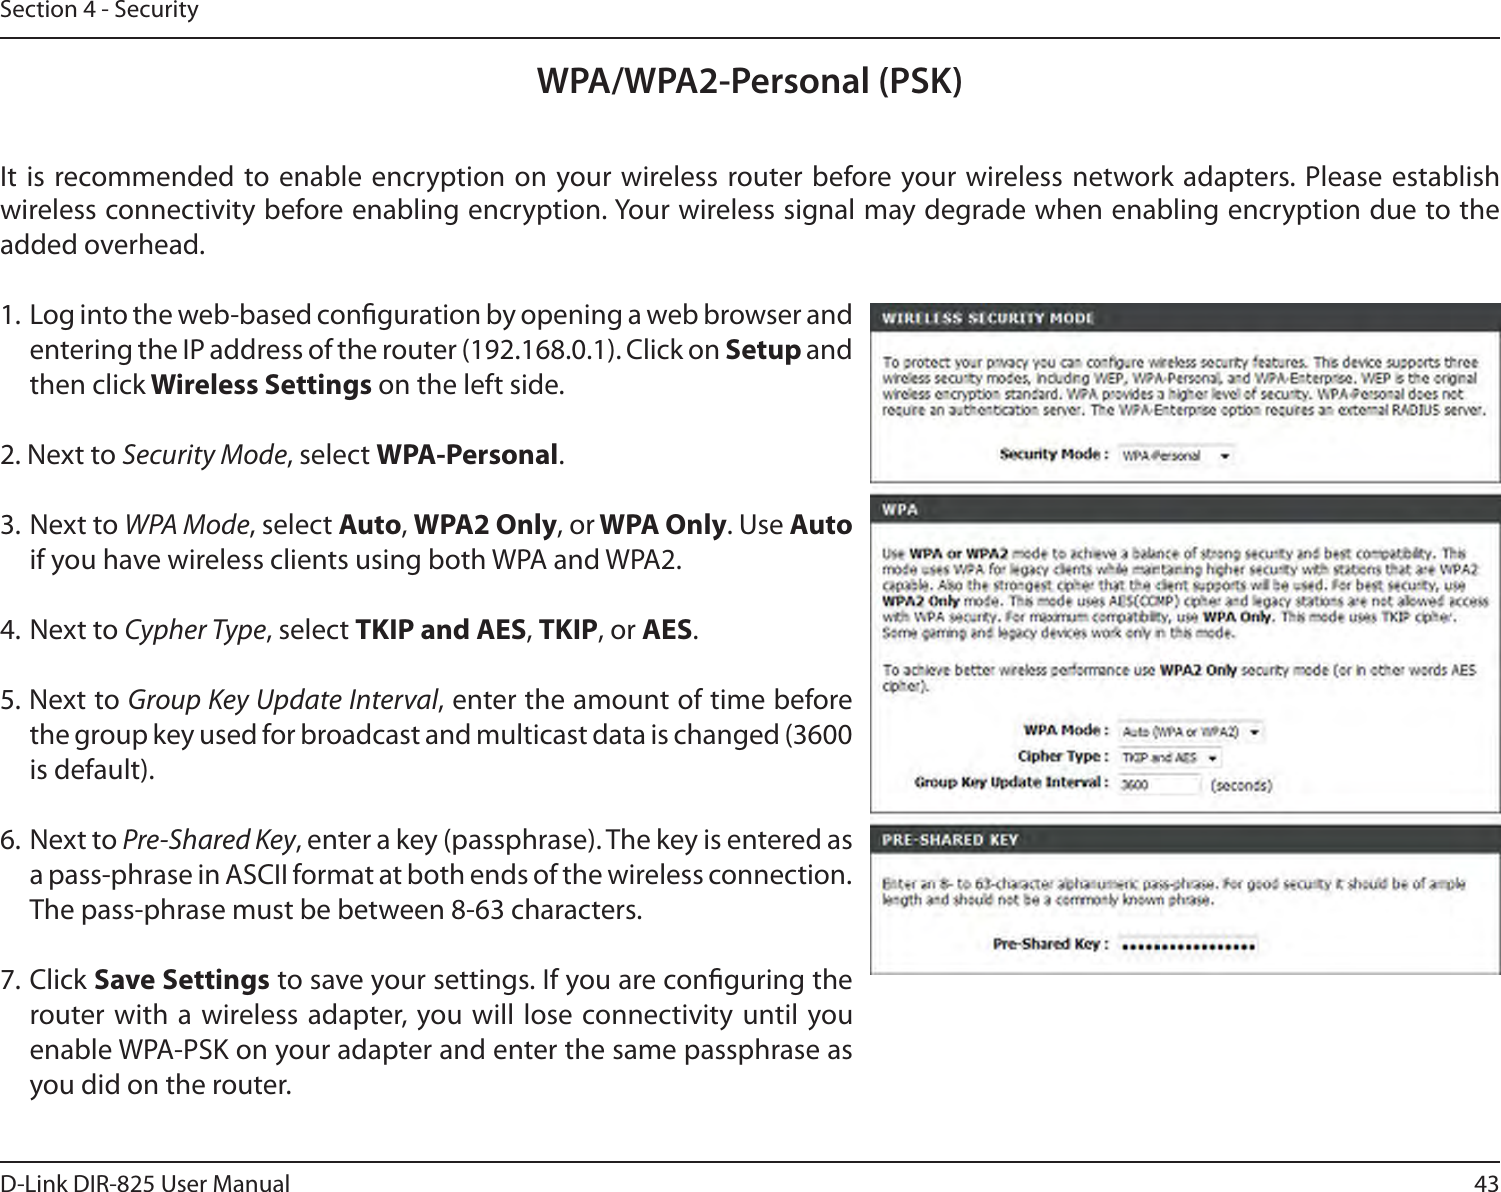 43D-Link DIR-825 User ManualSection 4 - SecurityWPA/WPA2-Personal (PSK)It  is recommended to enable  encryption on your wireless router before your wireless network adapters. Please establish wireless connectivity before enabling encryption. Your wireless signal may degrade when enabling encryption due to the added overhead.1. Log into the web-based conguration by opening a web browser and entering the IP address of the router (192.168.0.1). Click on Setup and then click Wireless Settings on the left side.2. Next to Security Mode, select WPA-Personal.3. Next to WPA Mode, select Auto, WPA2 Only, or WPA Only. Use Auto if you have wireless clients using both WPA and WPA2.4. Next to Cypher Type, select TKIP and AES, TKIP, or AES.5. Next to Group Key Update Interval, enter the amount of time before the group key used for broadcast and multicast data is changed (3600 is default).6. Next to Pre-Shared Key, enter a key (passphrase). The key is entered as a pass-phrase in ASCII format at both ends of the wireless connection. The pass-phrase must be between 8-63 characters. 7. Click Save Settings to save your settings. If you are conguring the router with a  wireless adapter, you will lose  connectivity  until you enable WPA-PSK on your adapter and enter the same passphrase as you did on the router.